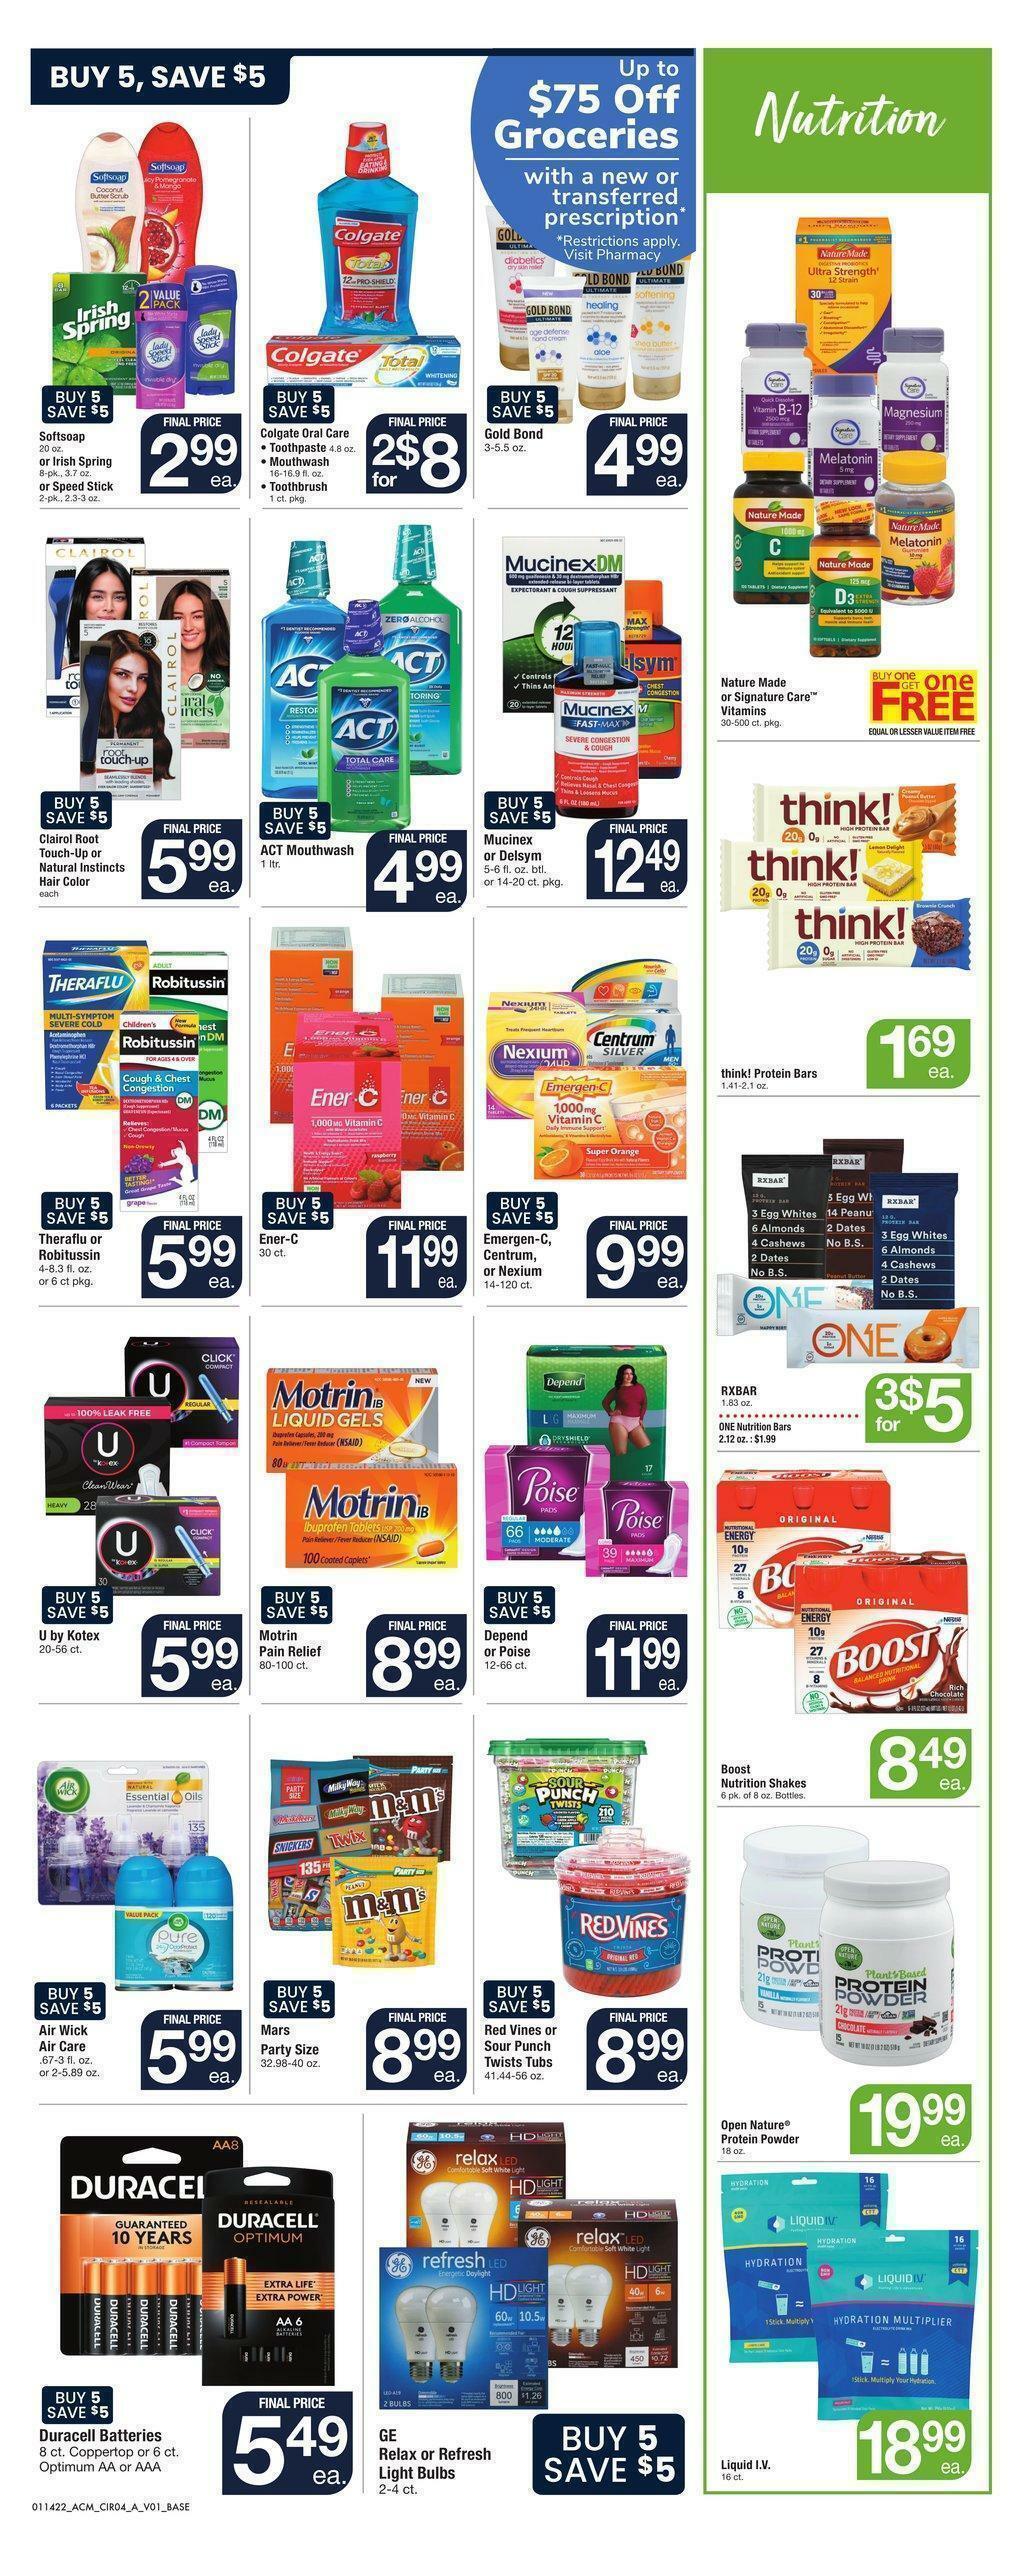 ACME Markets Weekly Ad from January 14